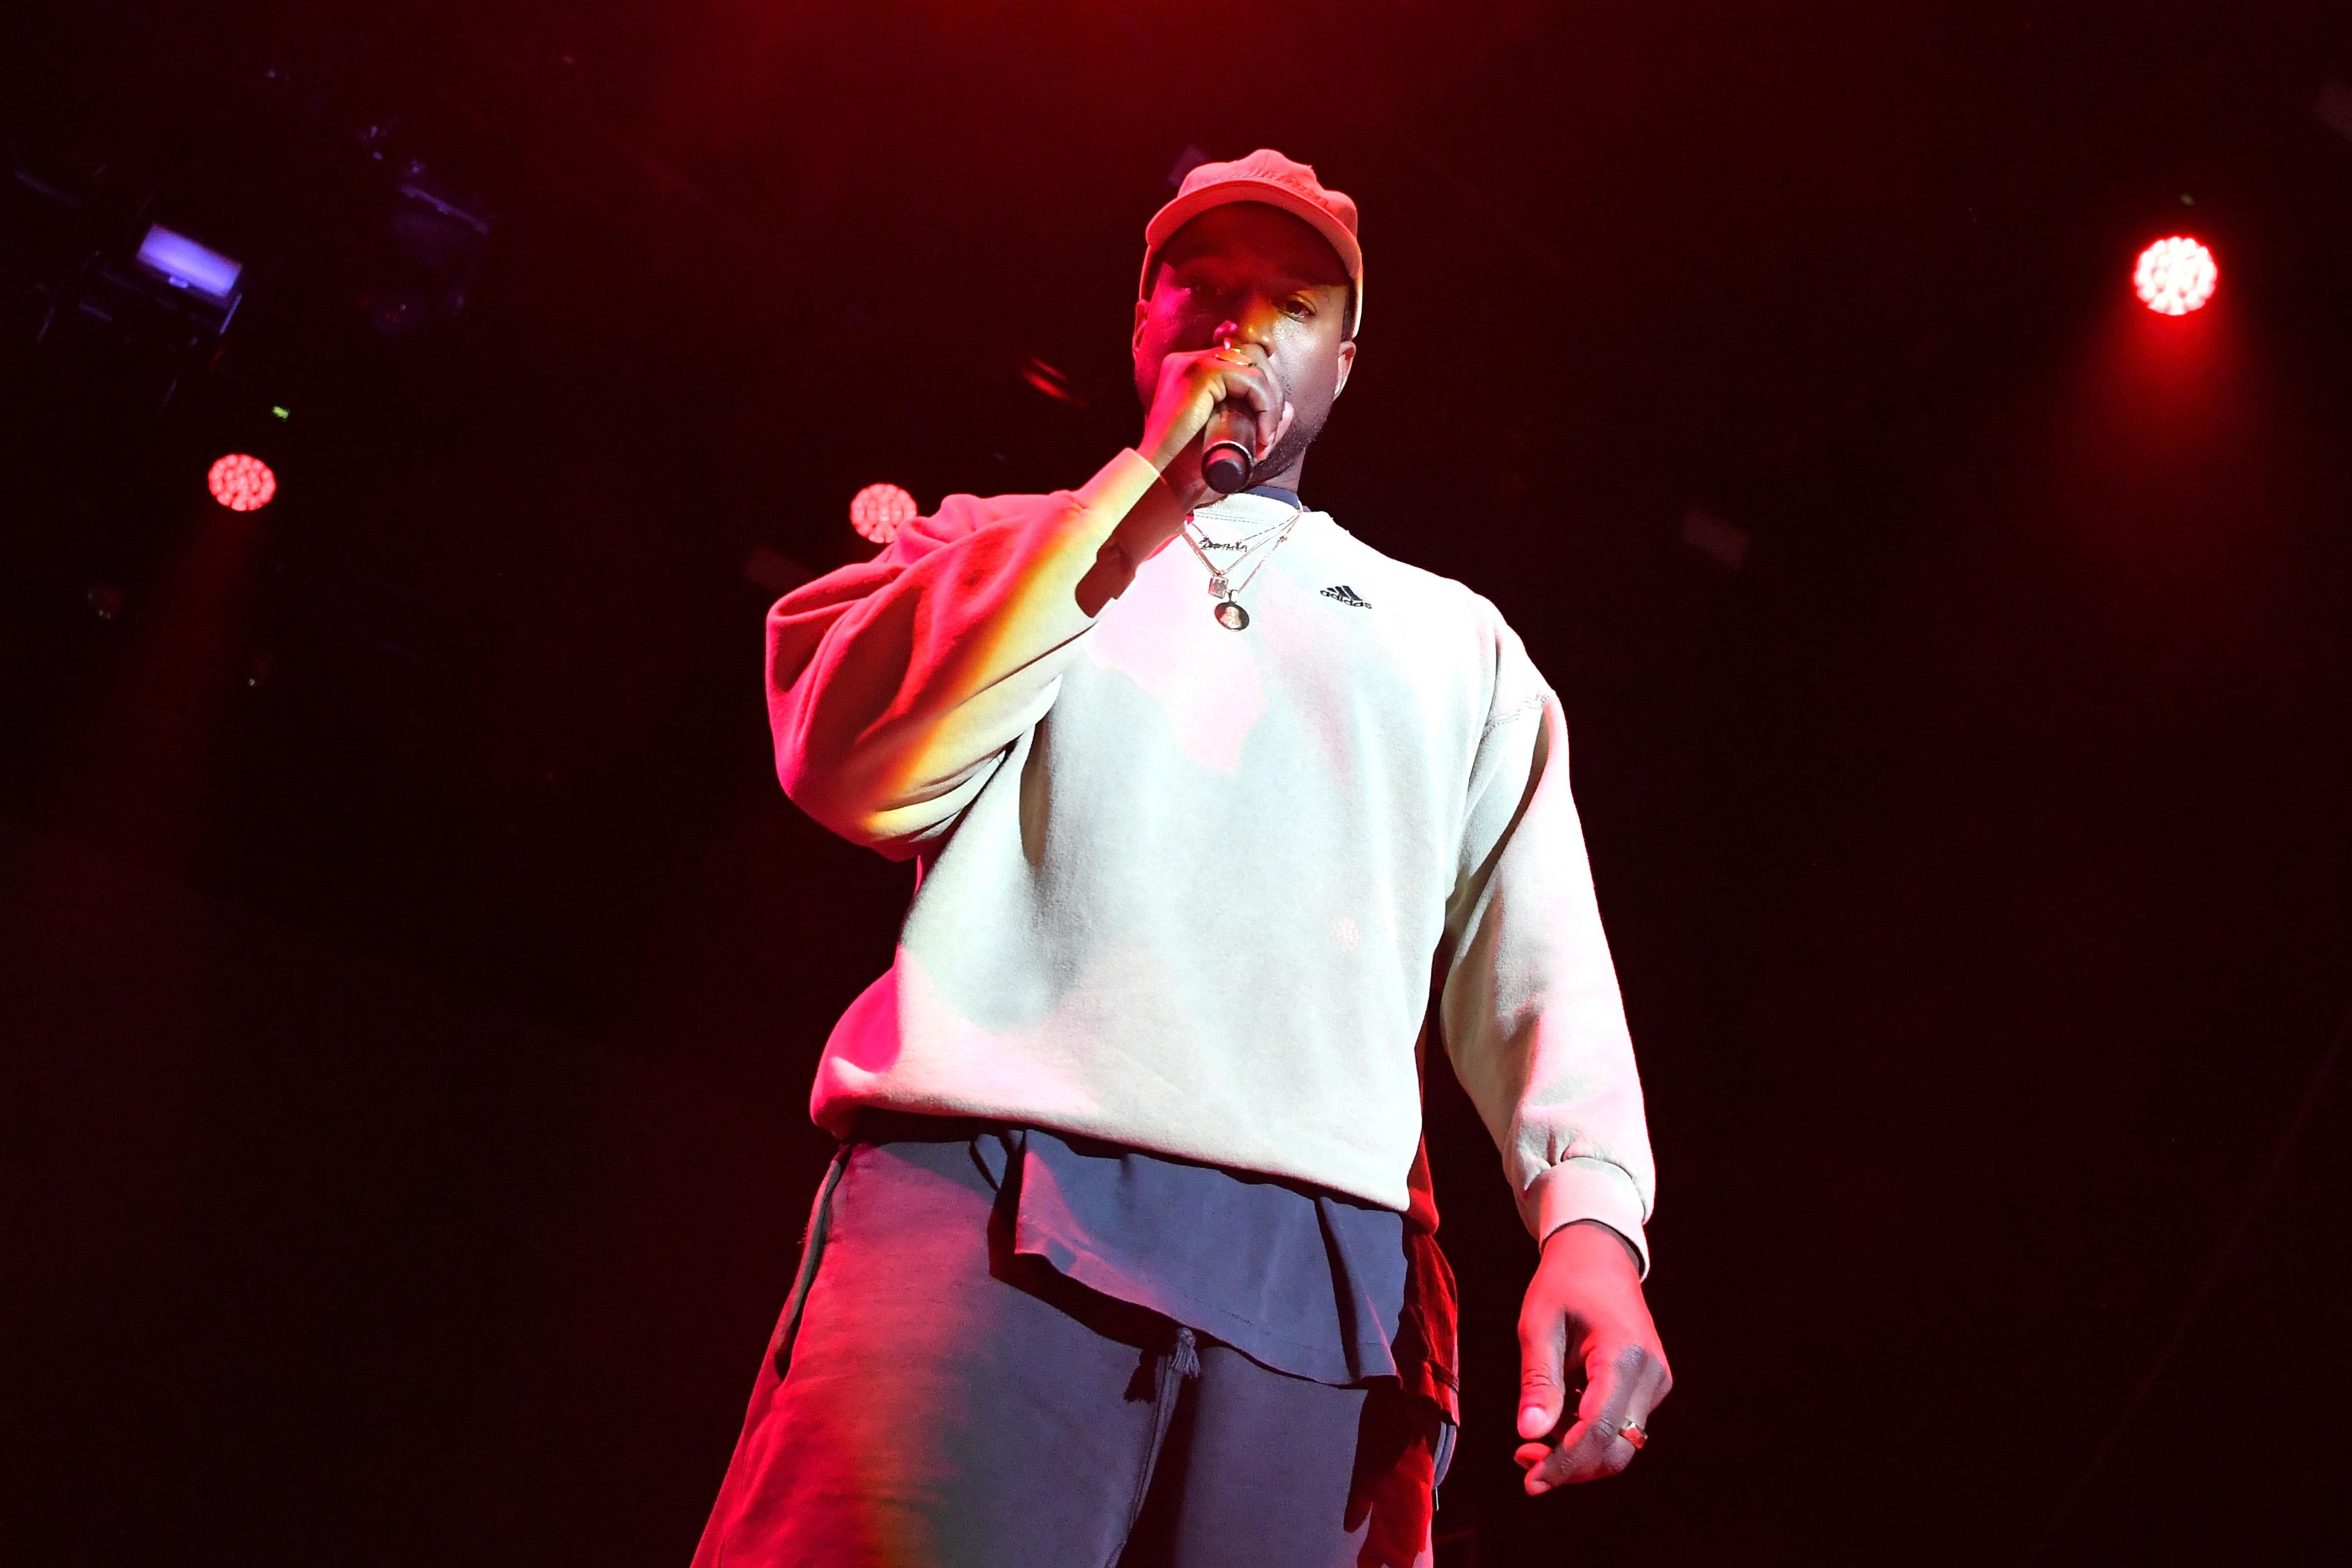 Kanye West holds a microphone onstage.